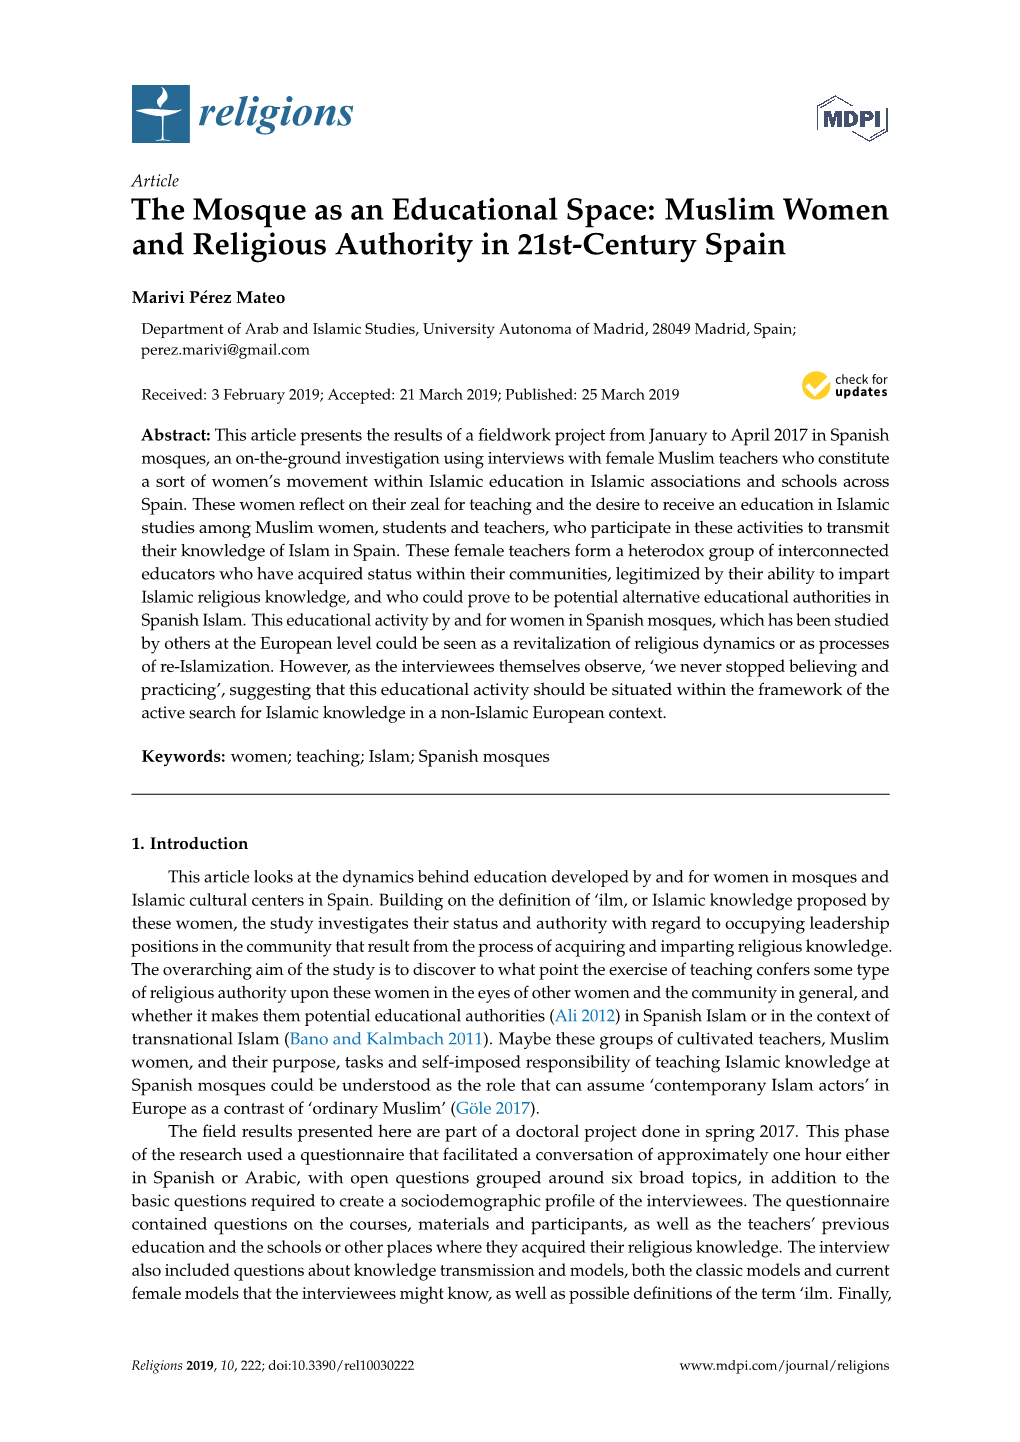 The Mosque As an Educational Space: Muslim Women and Religious Authority in 21St-Century Spain